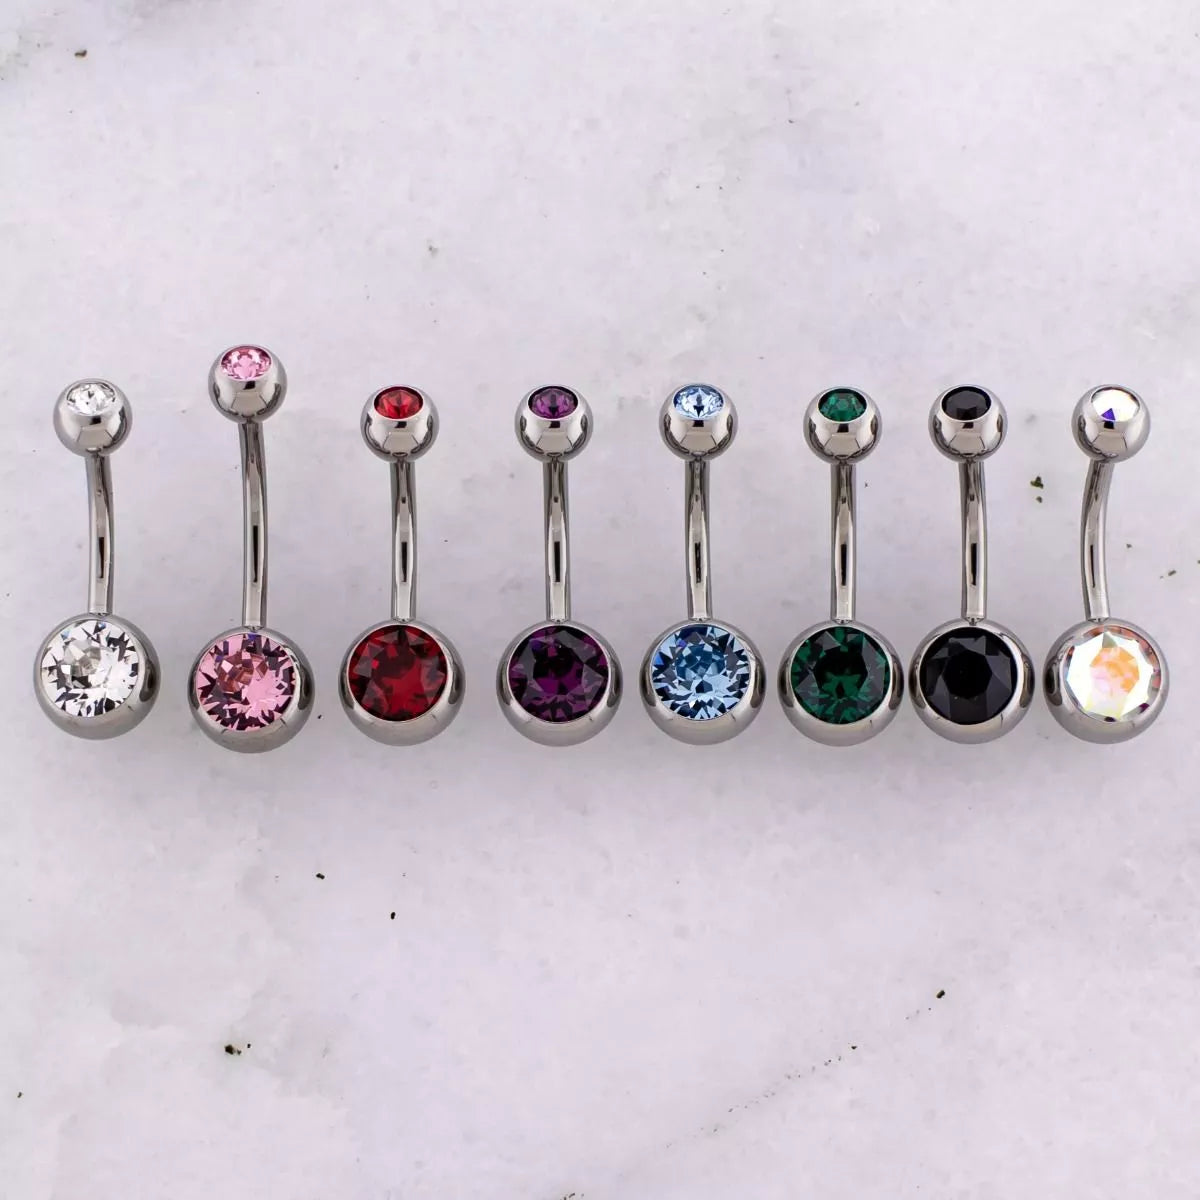 A Belly Button Ring Shows Confidence | Urban Body Jewelry